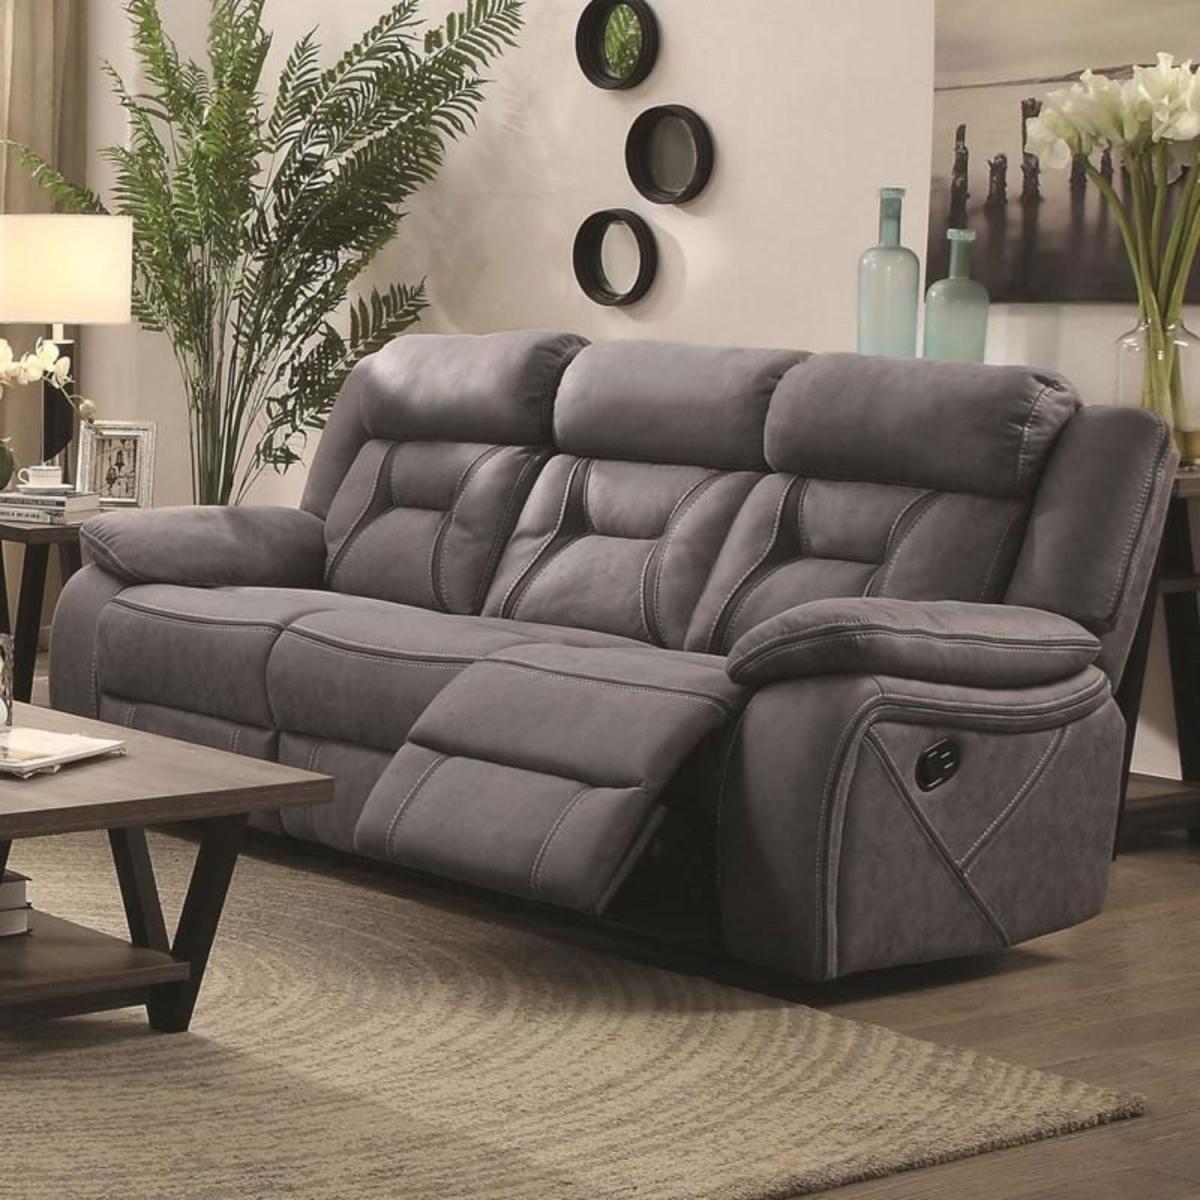 SILLON RECLINABLE HIGGINS 3 PERS. GRIS